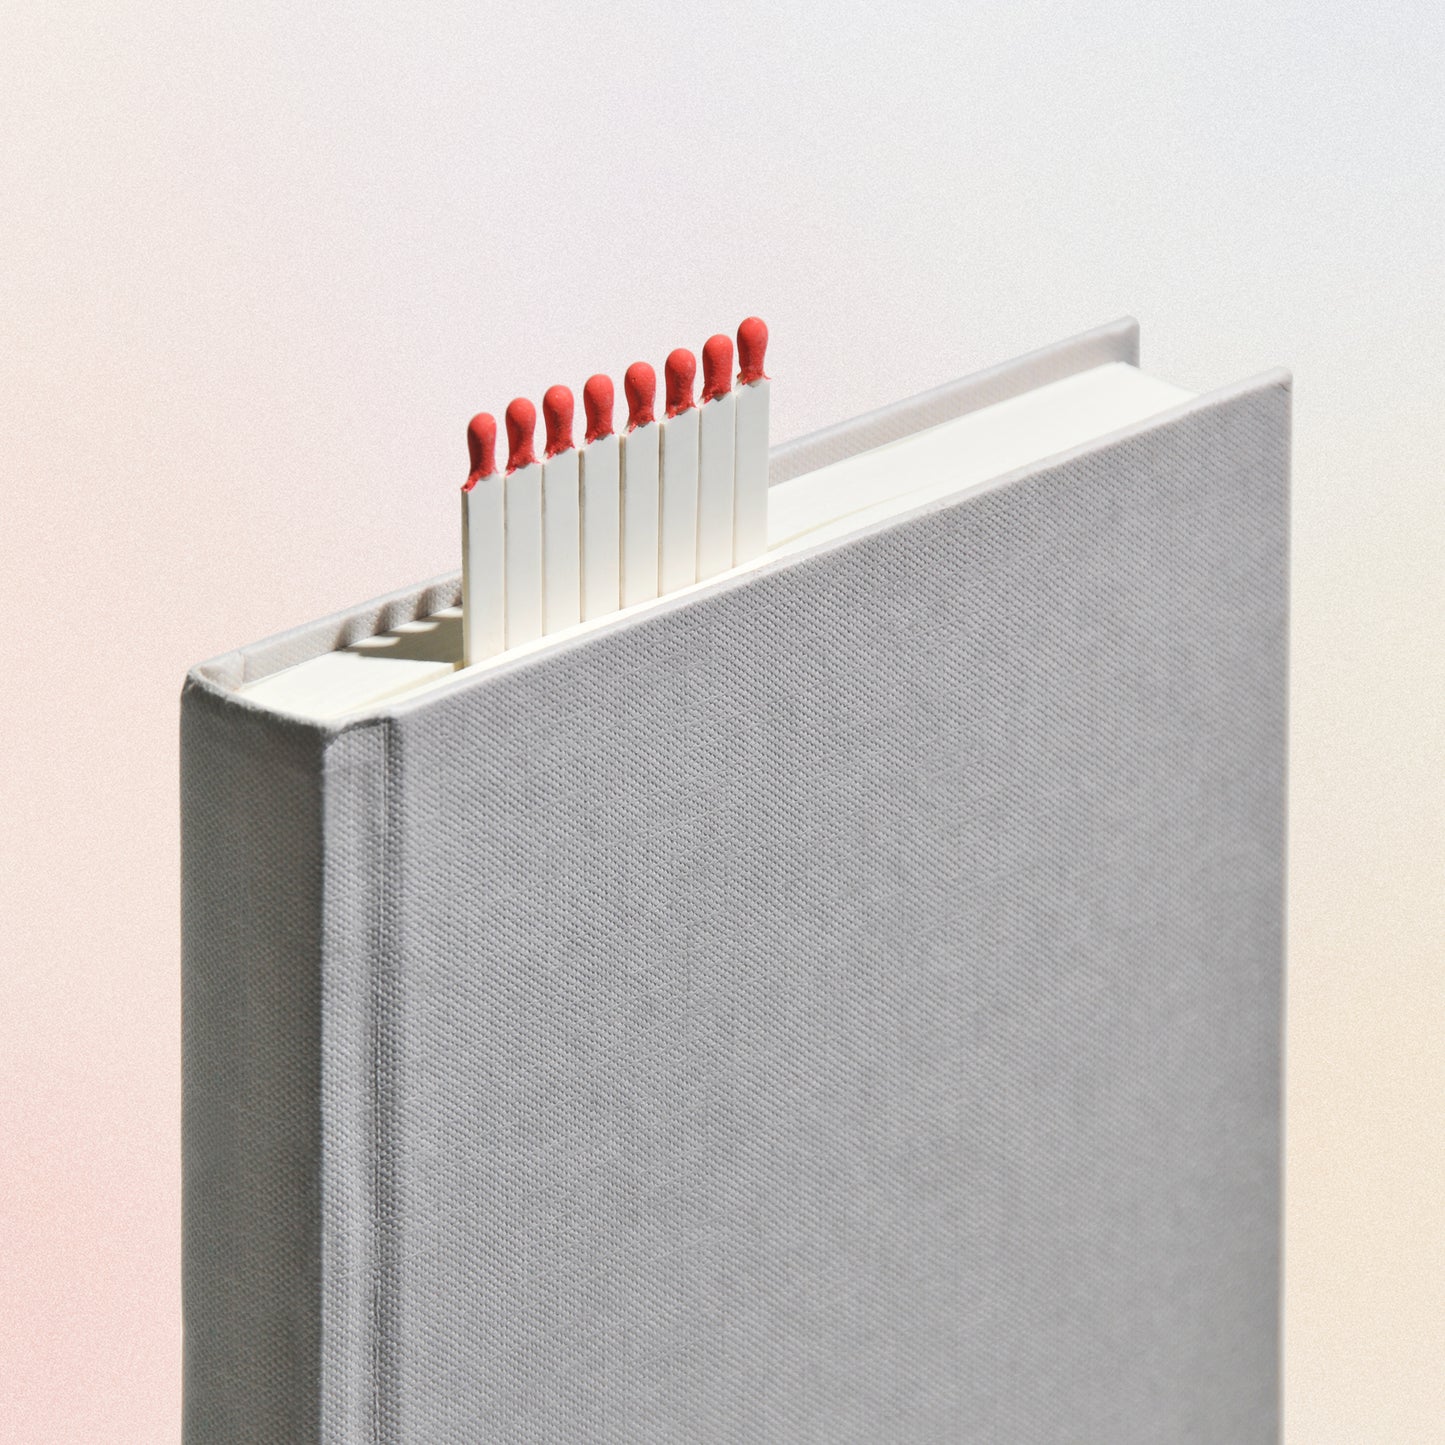 bookmark with removable matches inside a book